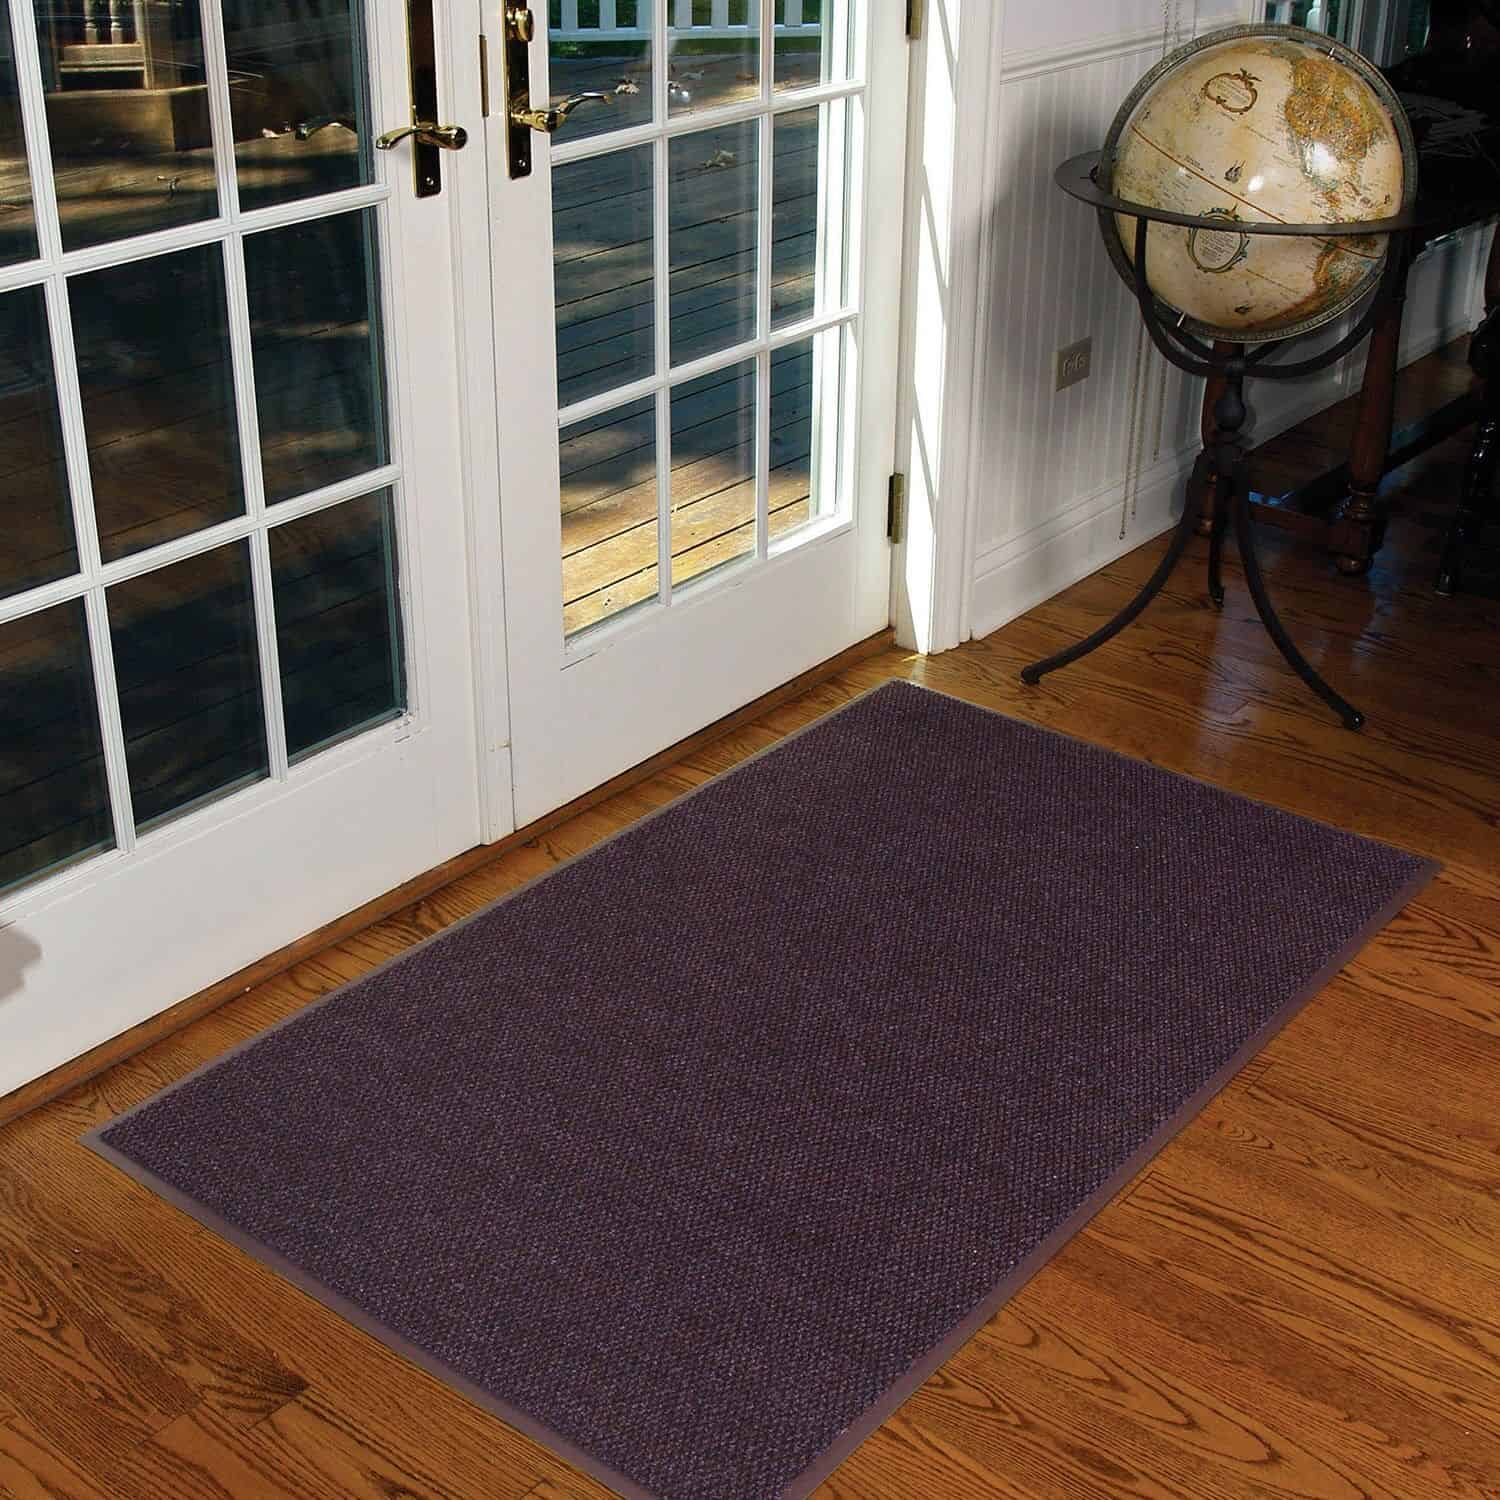 Spruce up your home with a door mat.